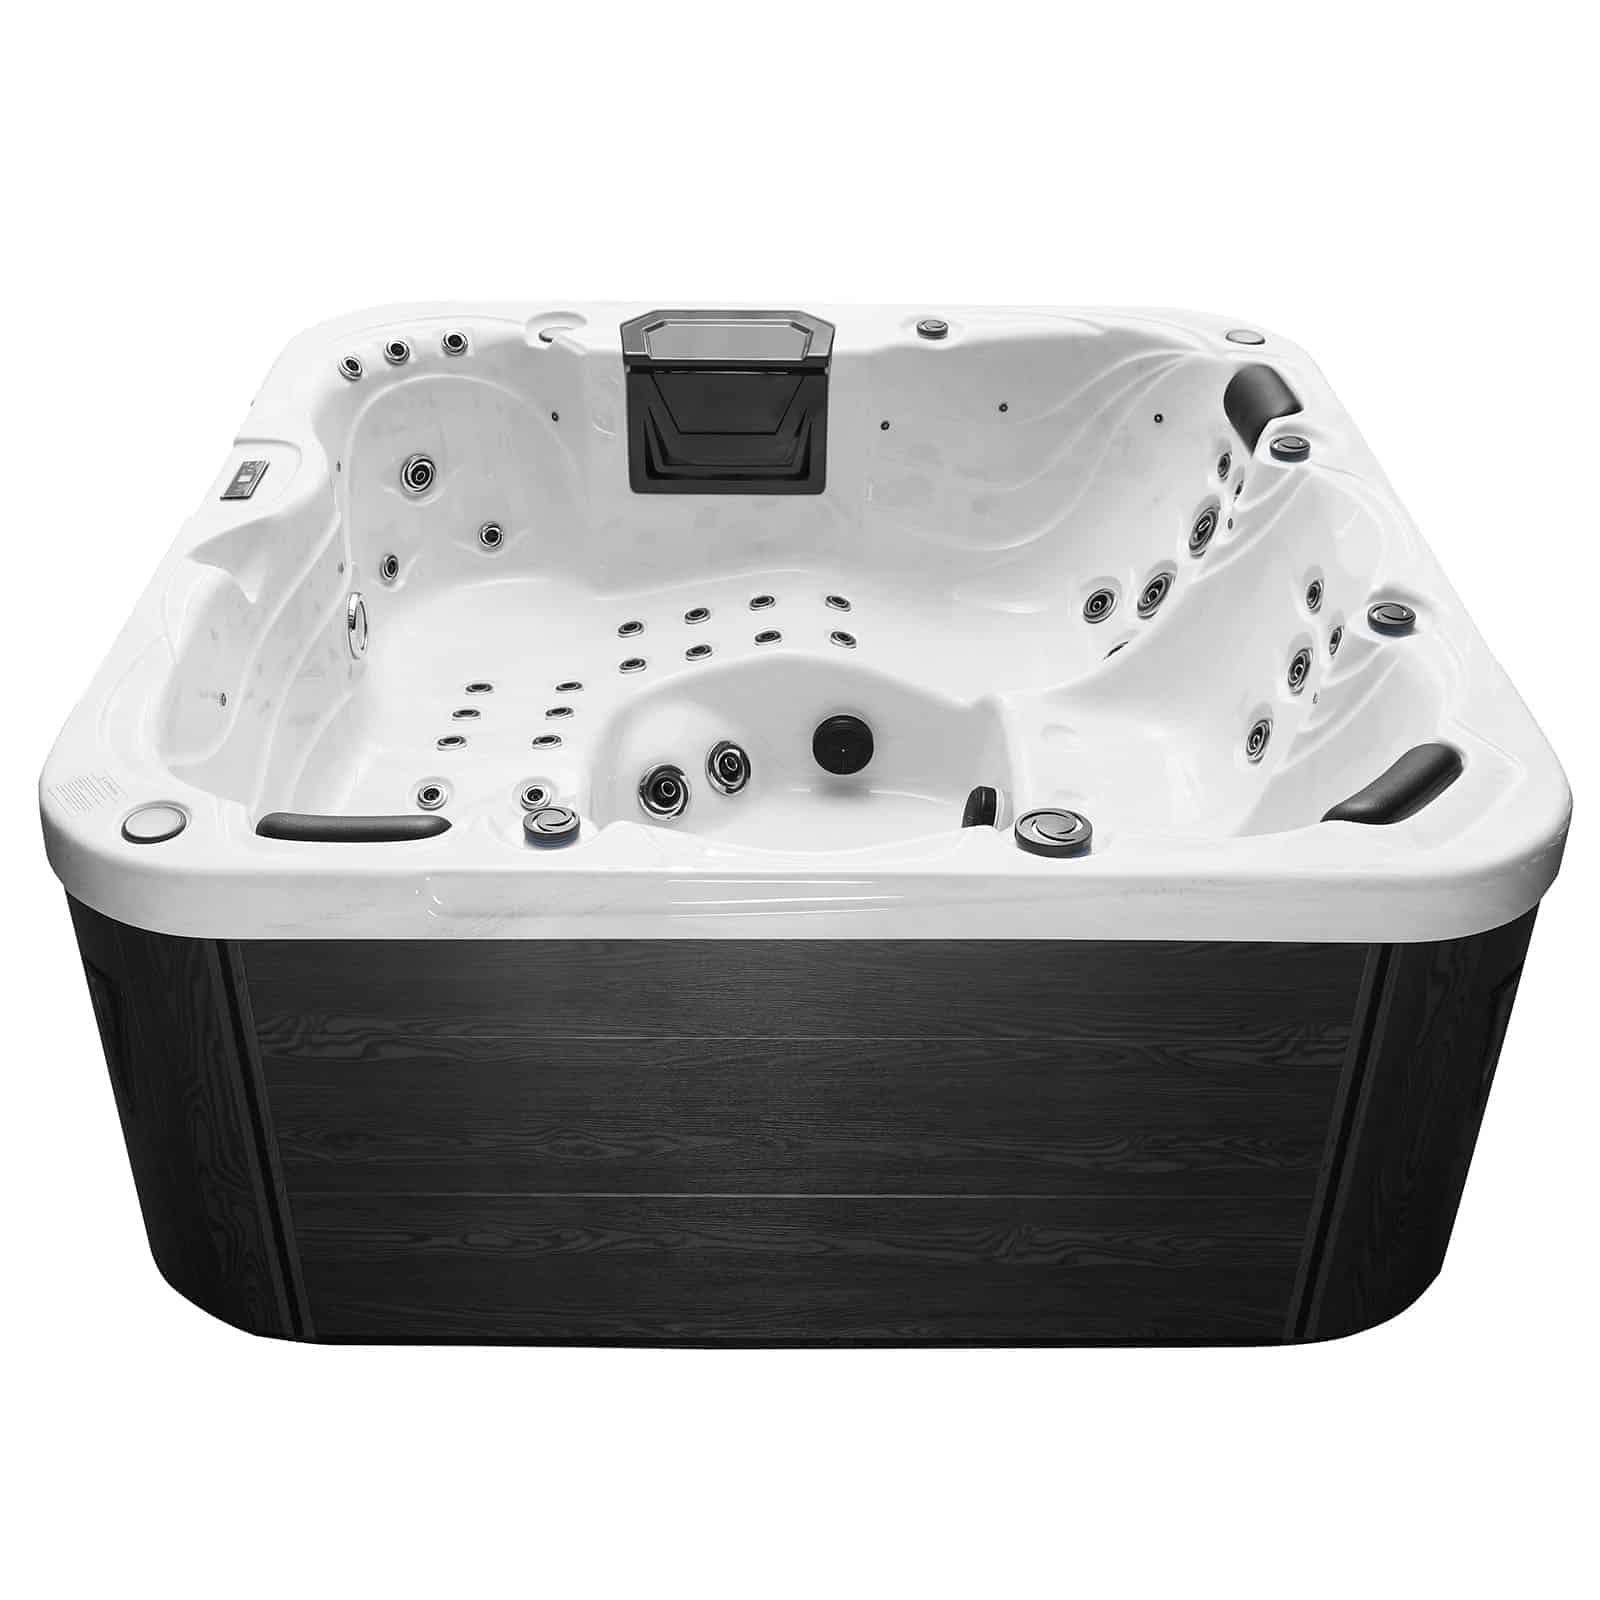 Hot Tub Sales Event Raleigh